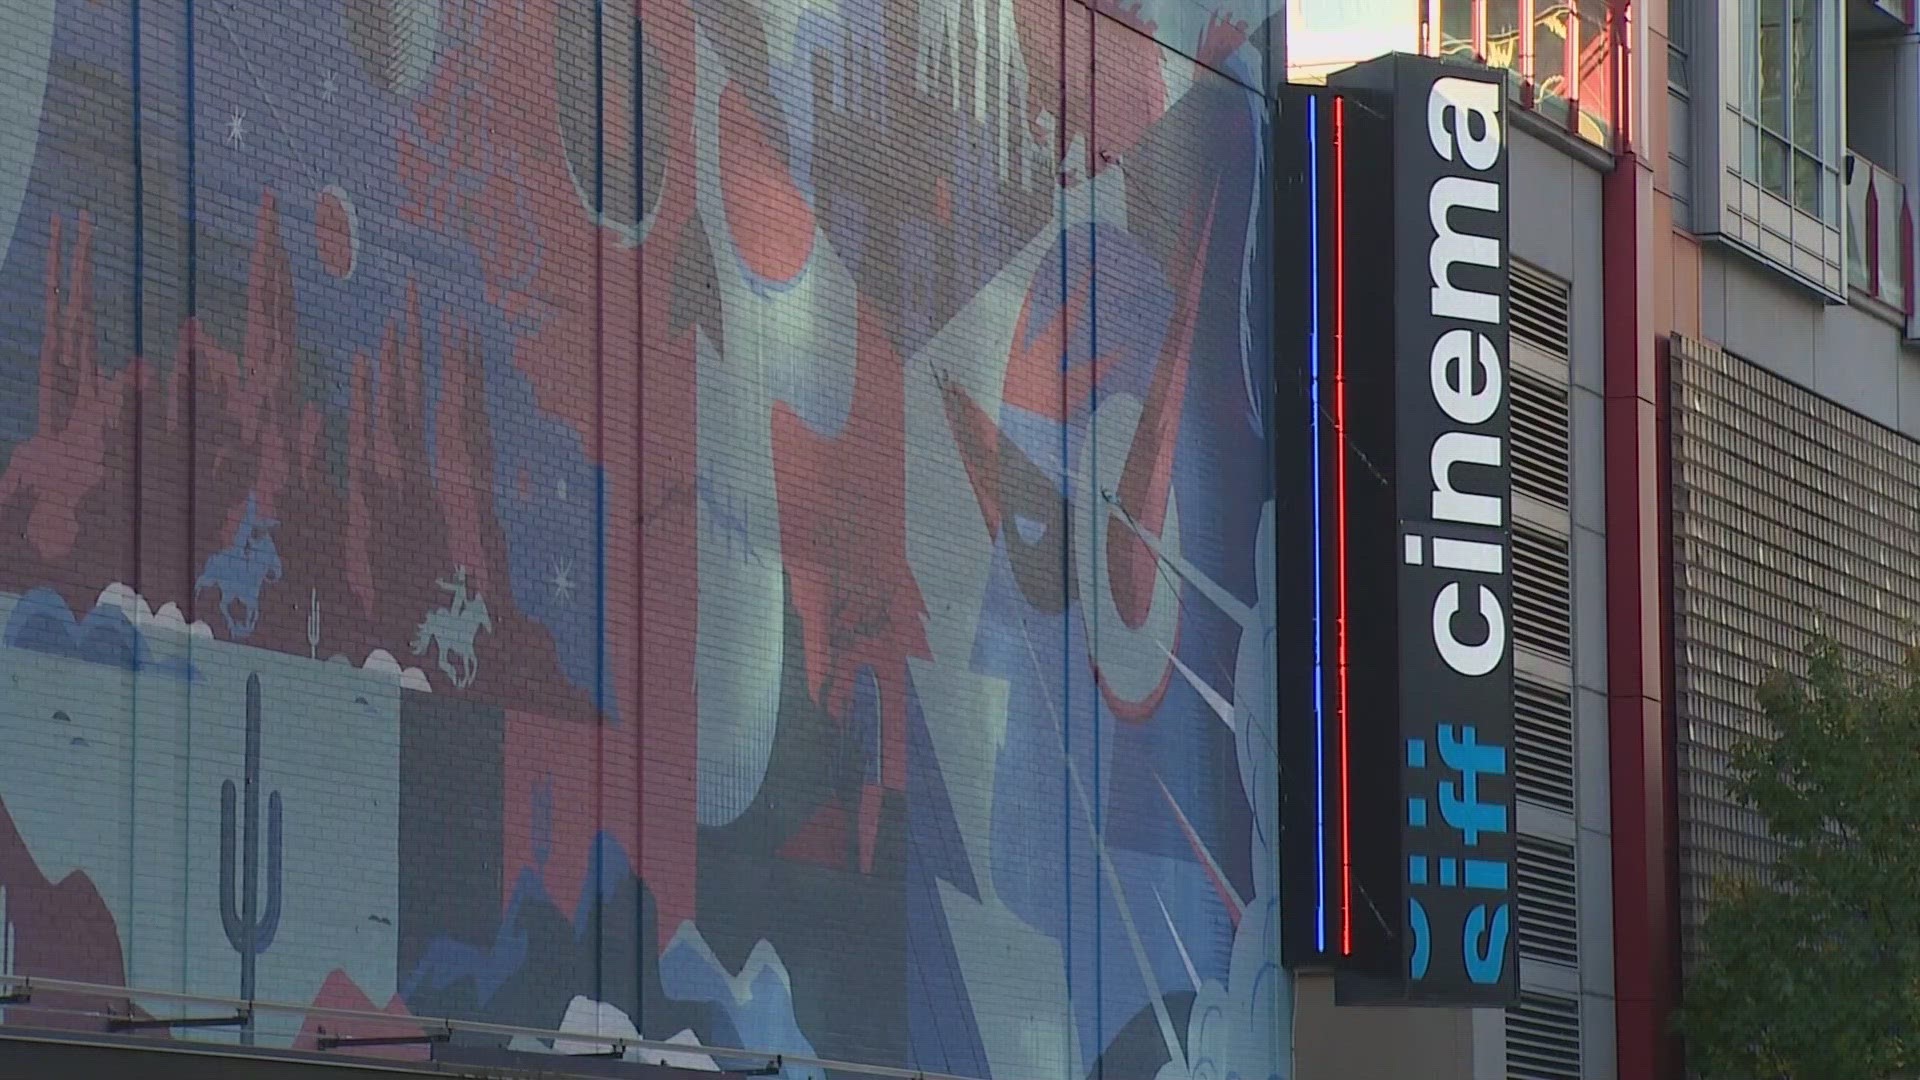 The sale of the building required the Cinerama signage to be taken down. SIFF says it will reopen later this year.